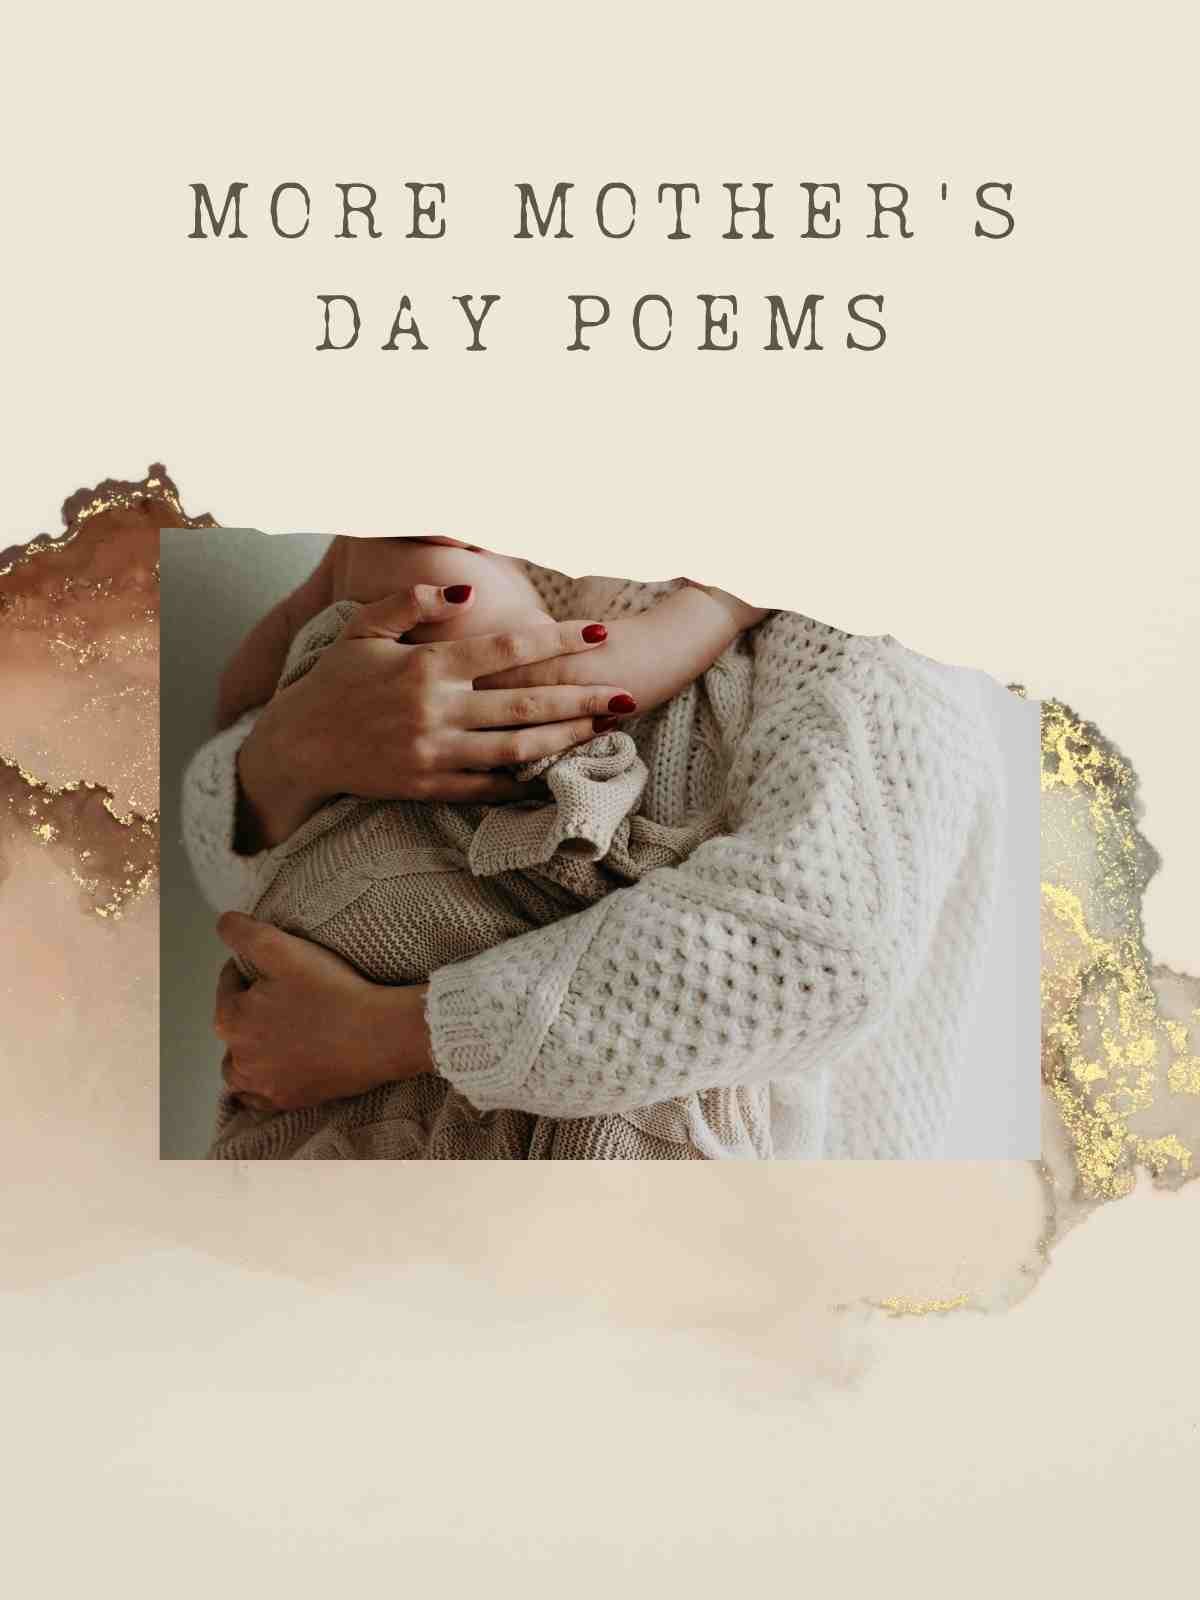 Mother's Day poetry for biological moms